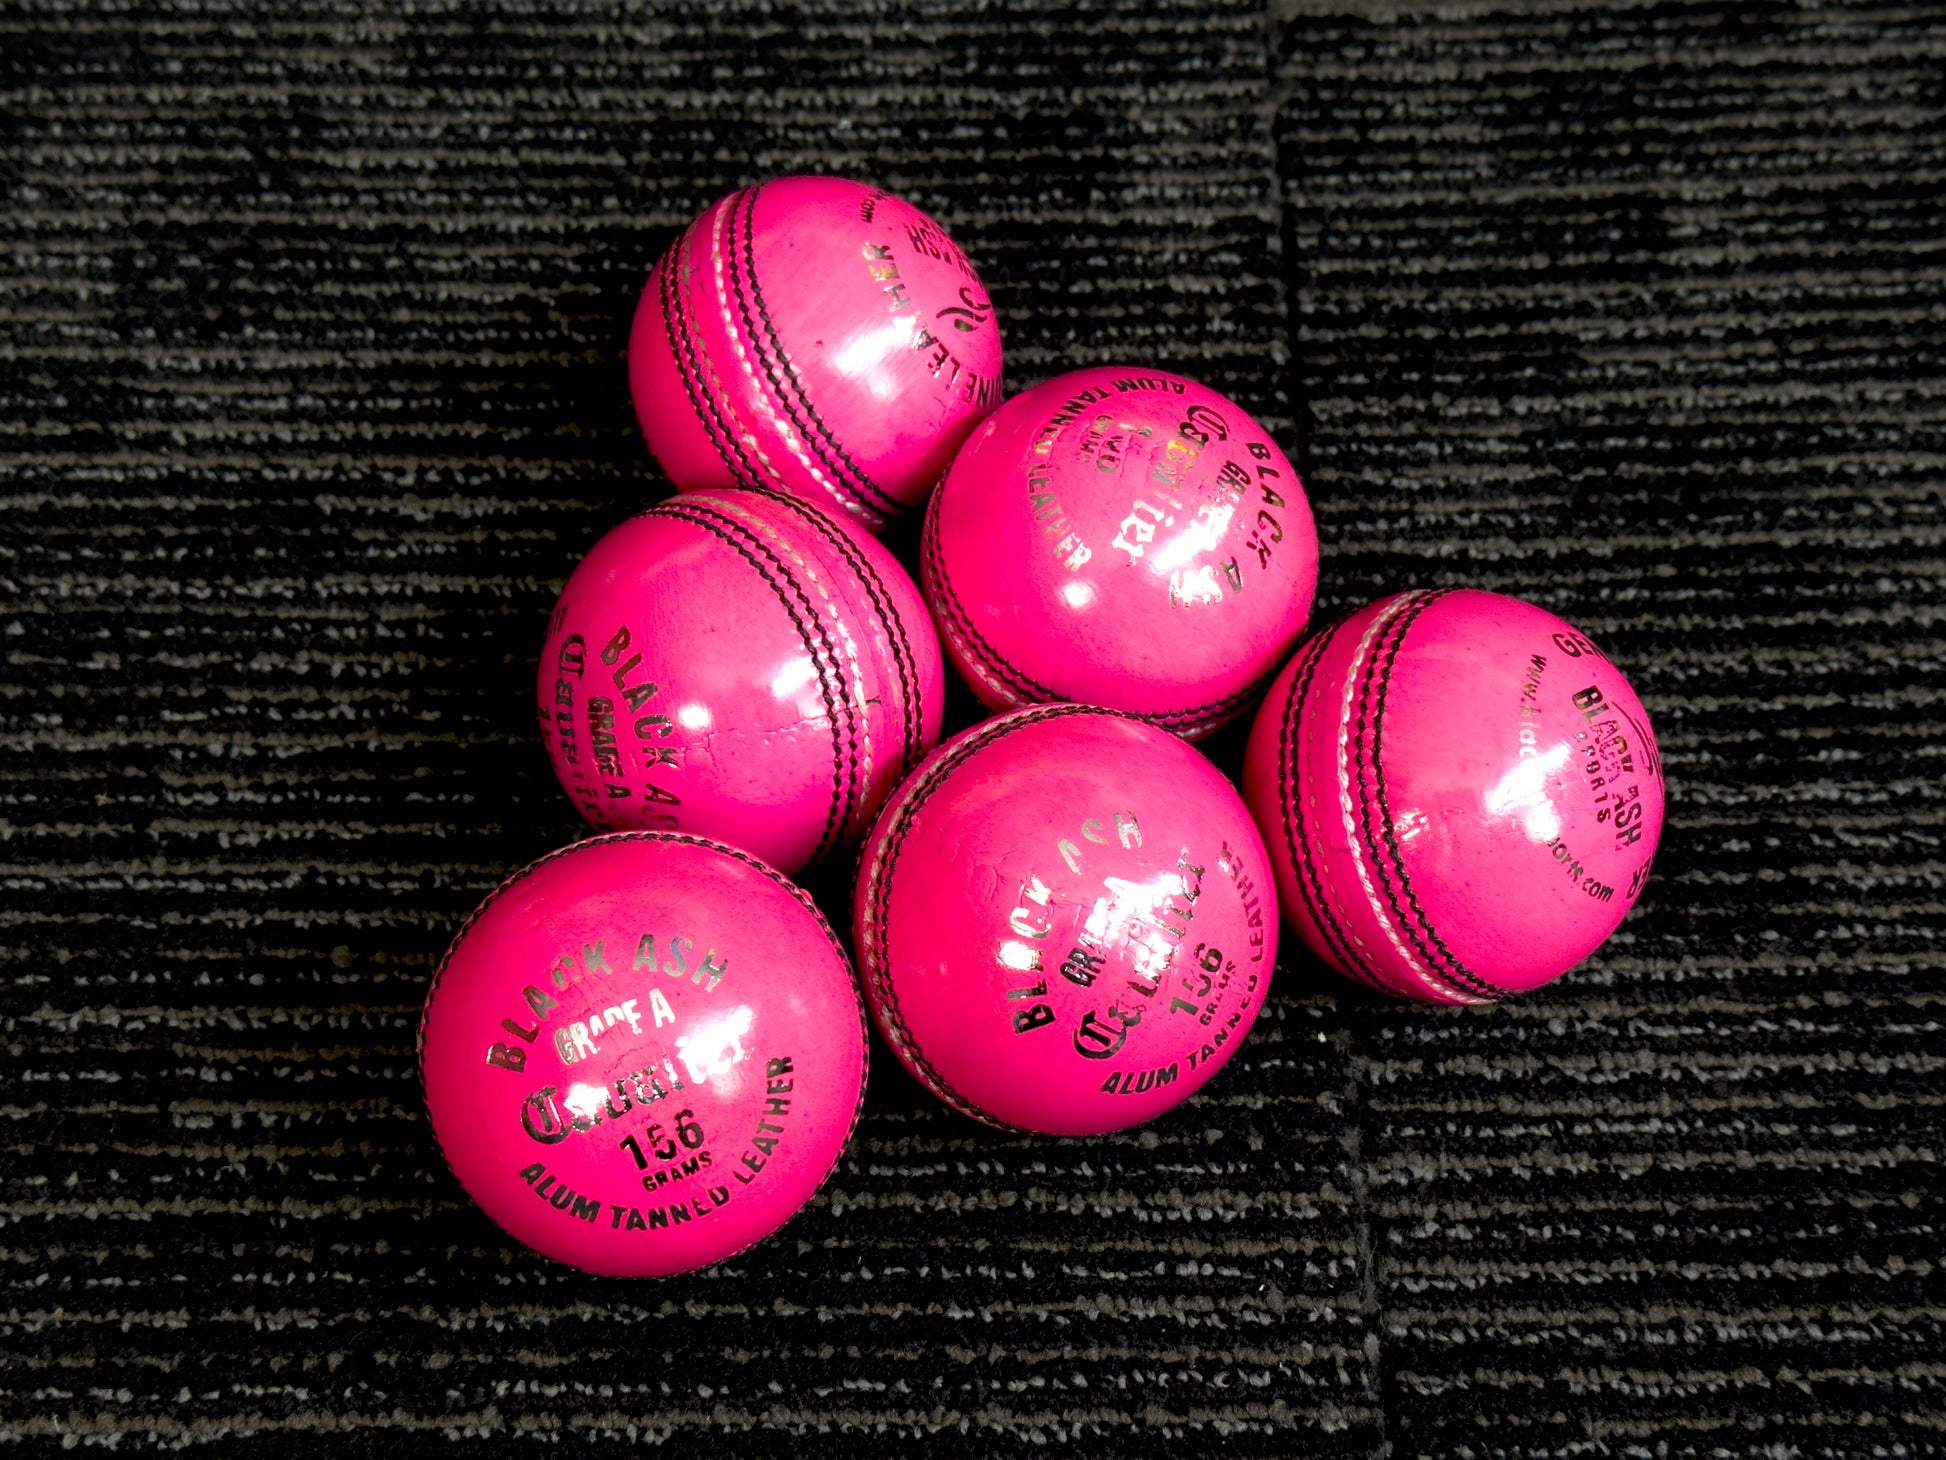 Pack of 6 pink cricket balls named 'Black Ash Cavalier,' crafted from premium quality, genuine Australian alum-tanned leather with a 4-piece construction for superior shape retention. These waterproof balls are suitable for 50 overs, conform to MCC regulations, machine-stitched, and each weighs 156 grams (5.5 ounces).